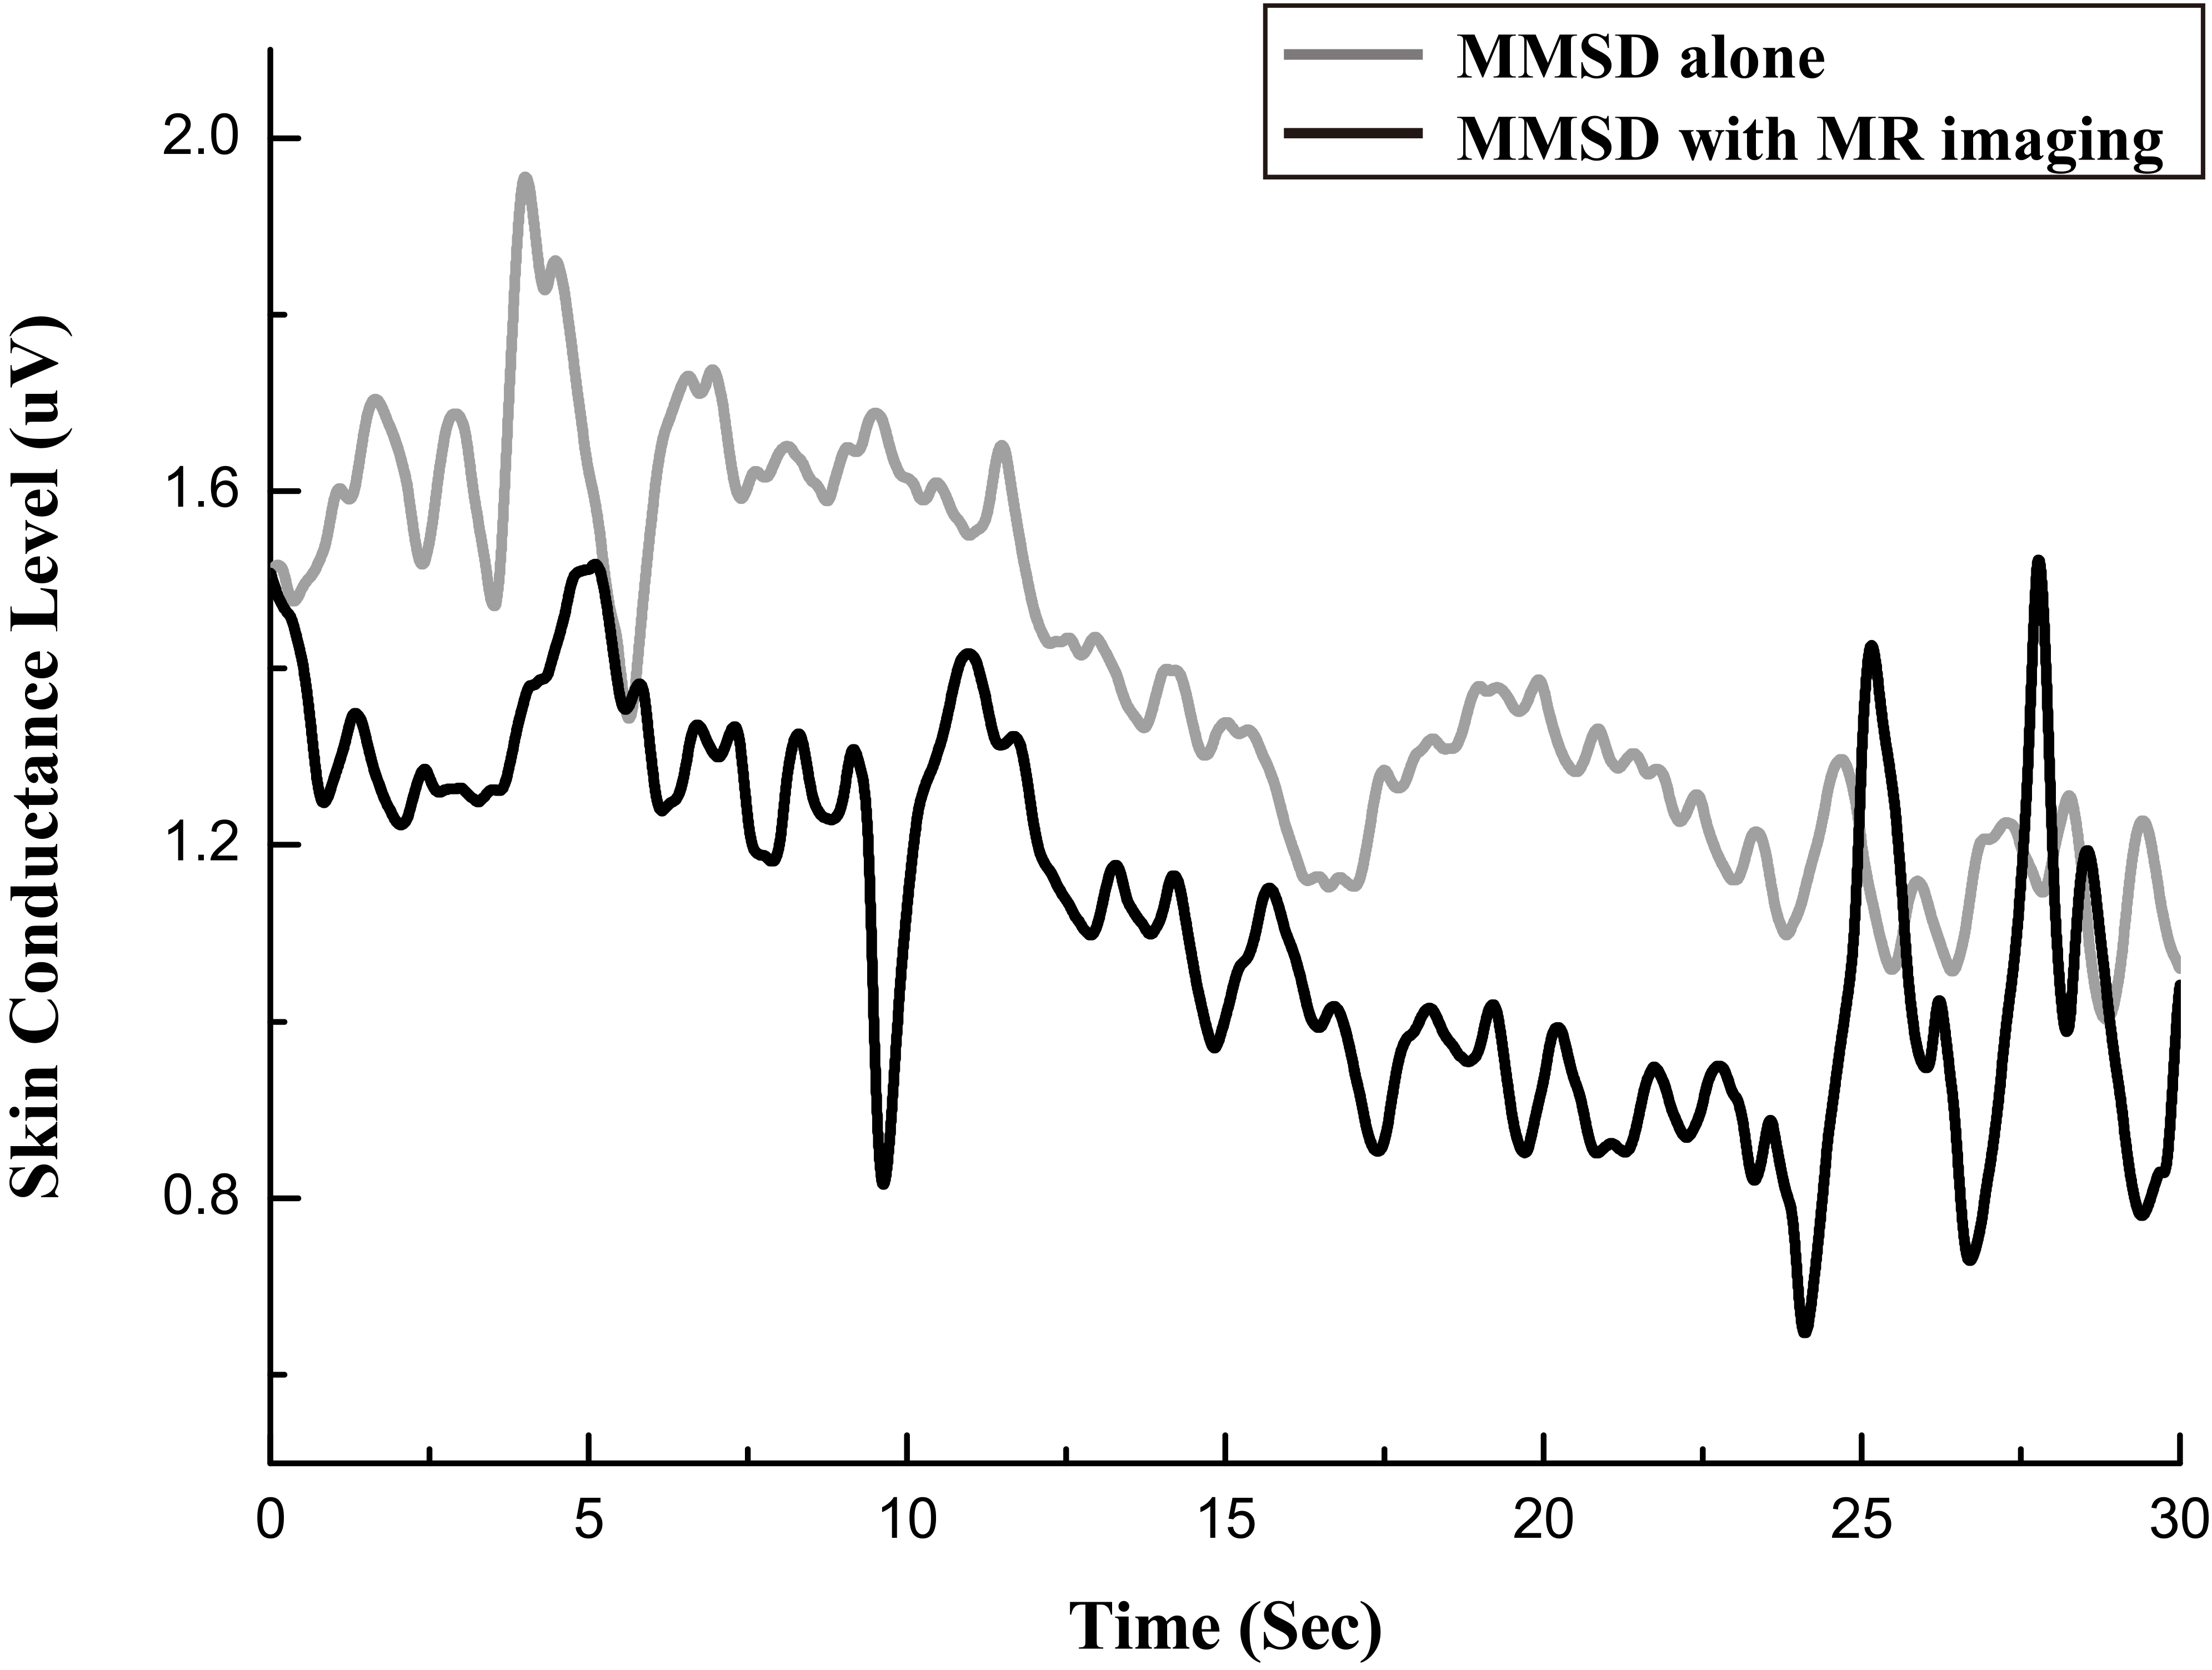 The skin conductance level signal in microvolts, measured with MMSD-alone and with MMSD + MR imaging.